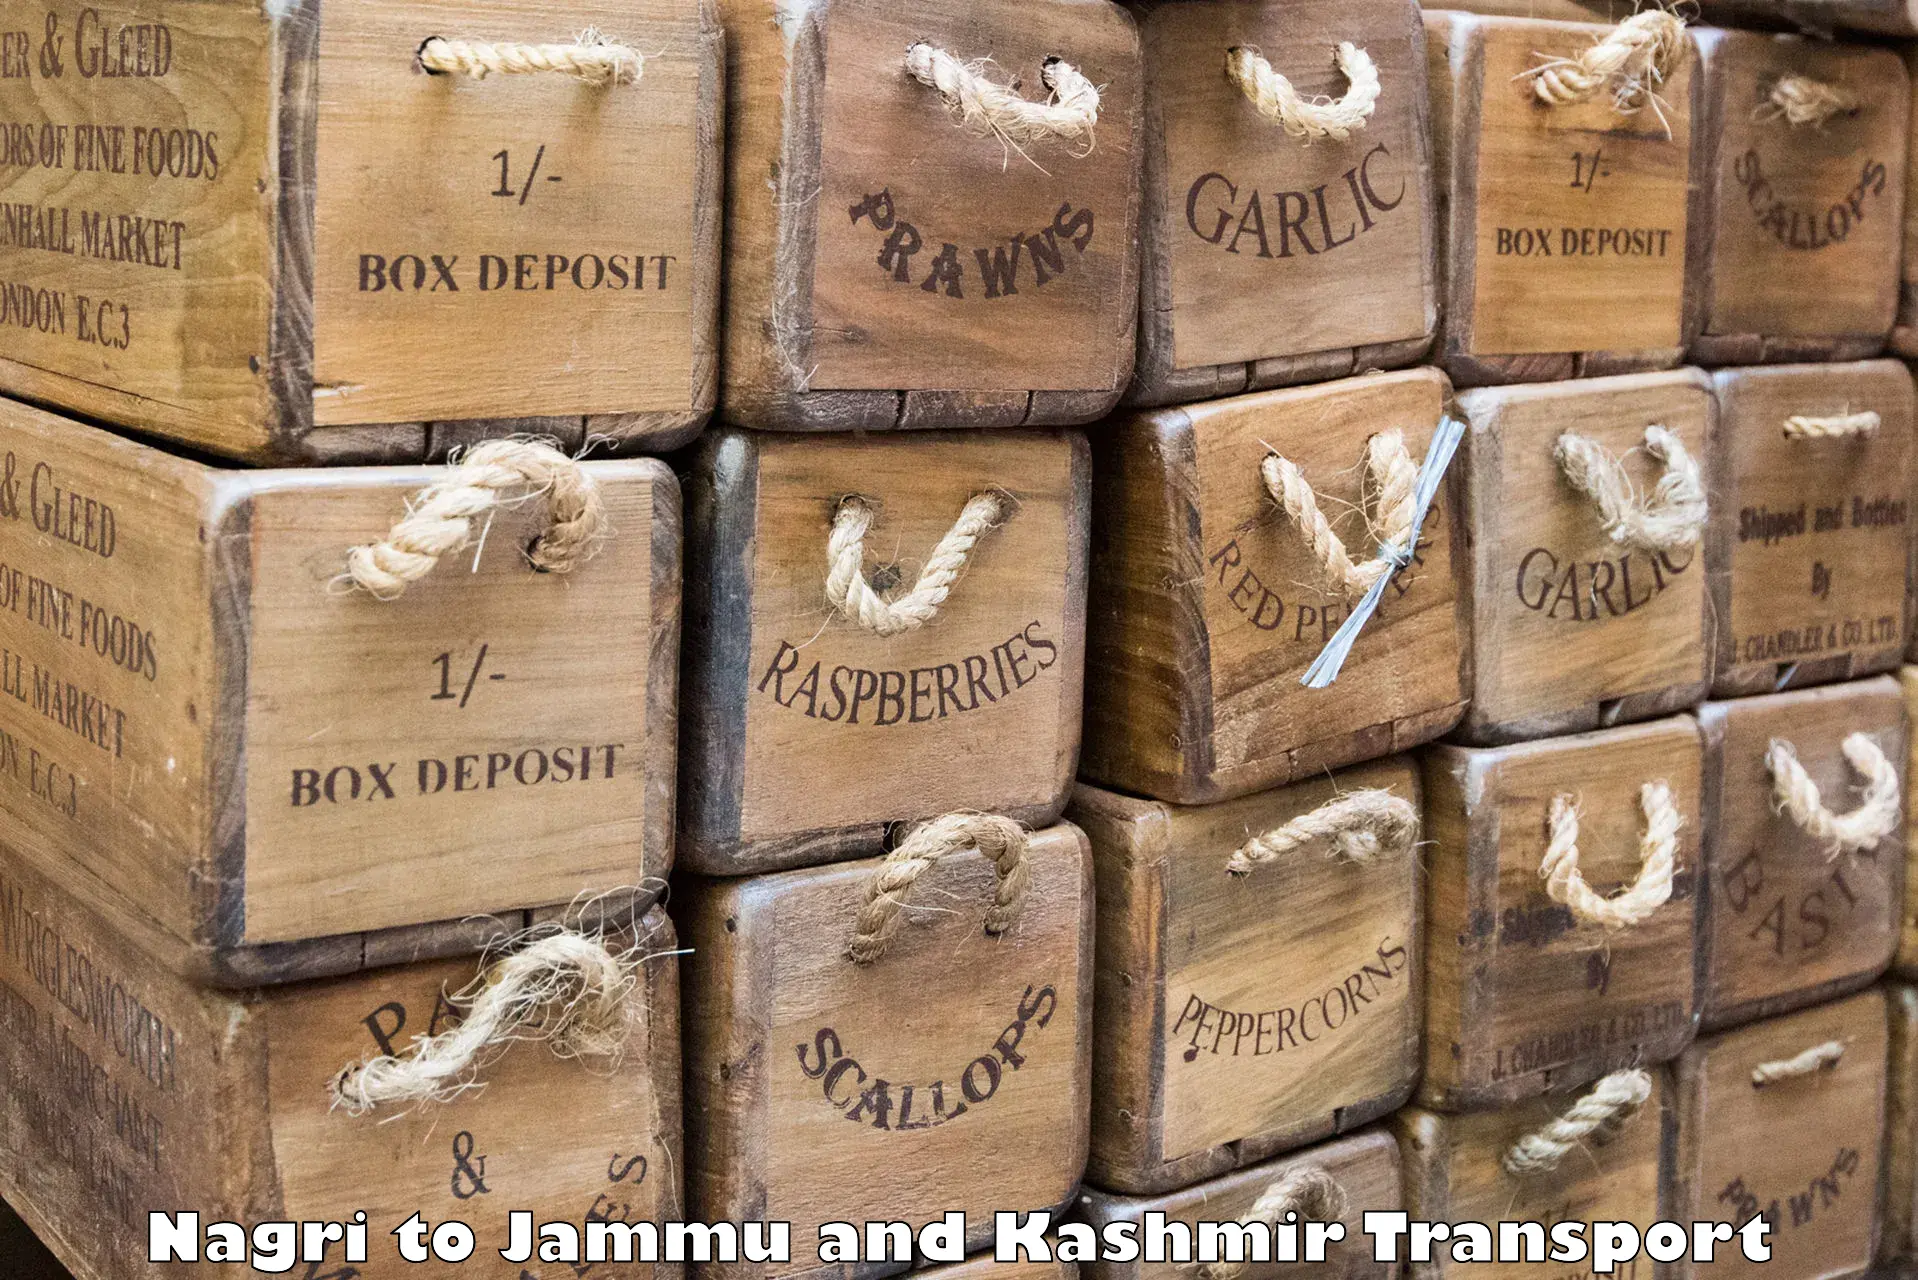 Container transport service Nagri to Budgam